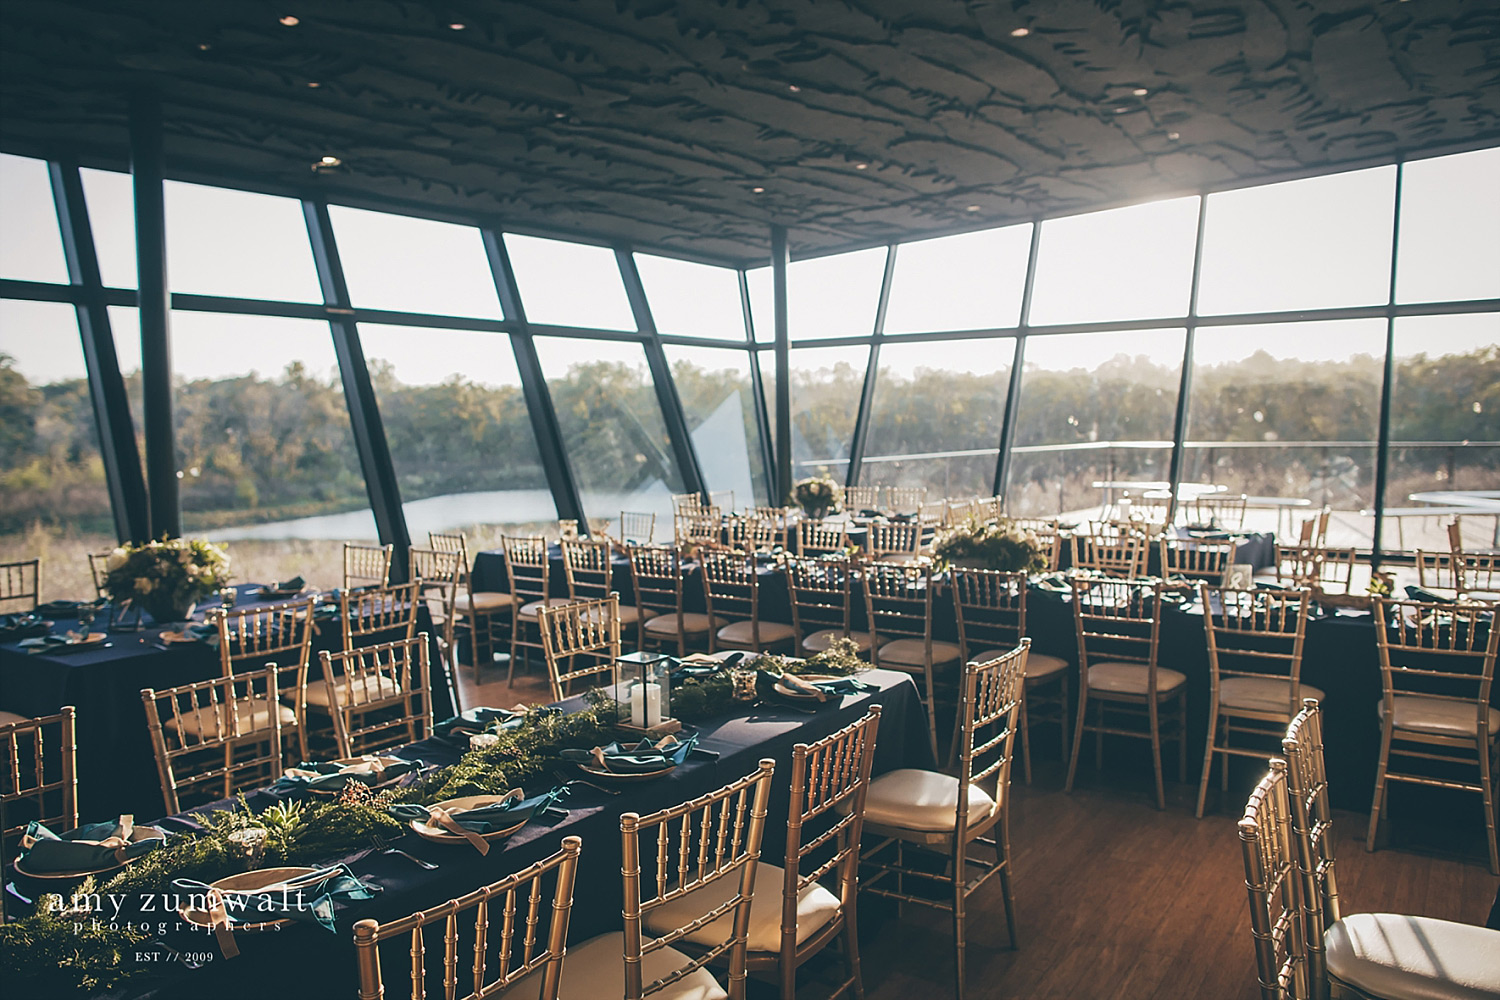 Trinity River Audubon Center wedding reception with gold chairs and navy linens